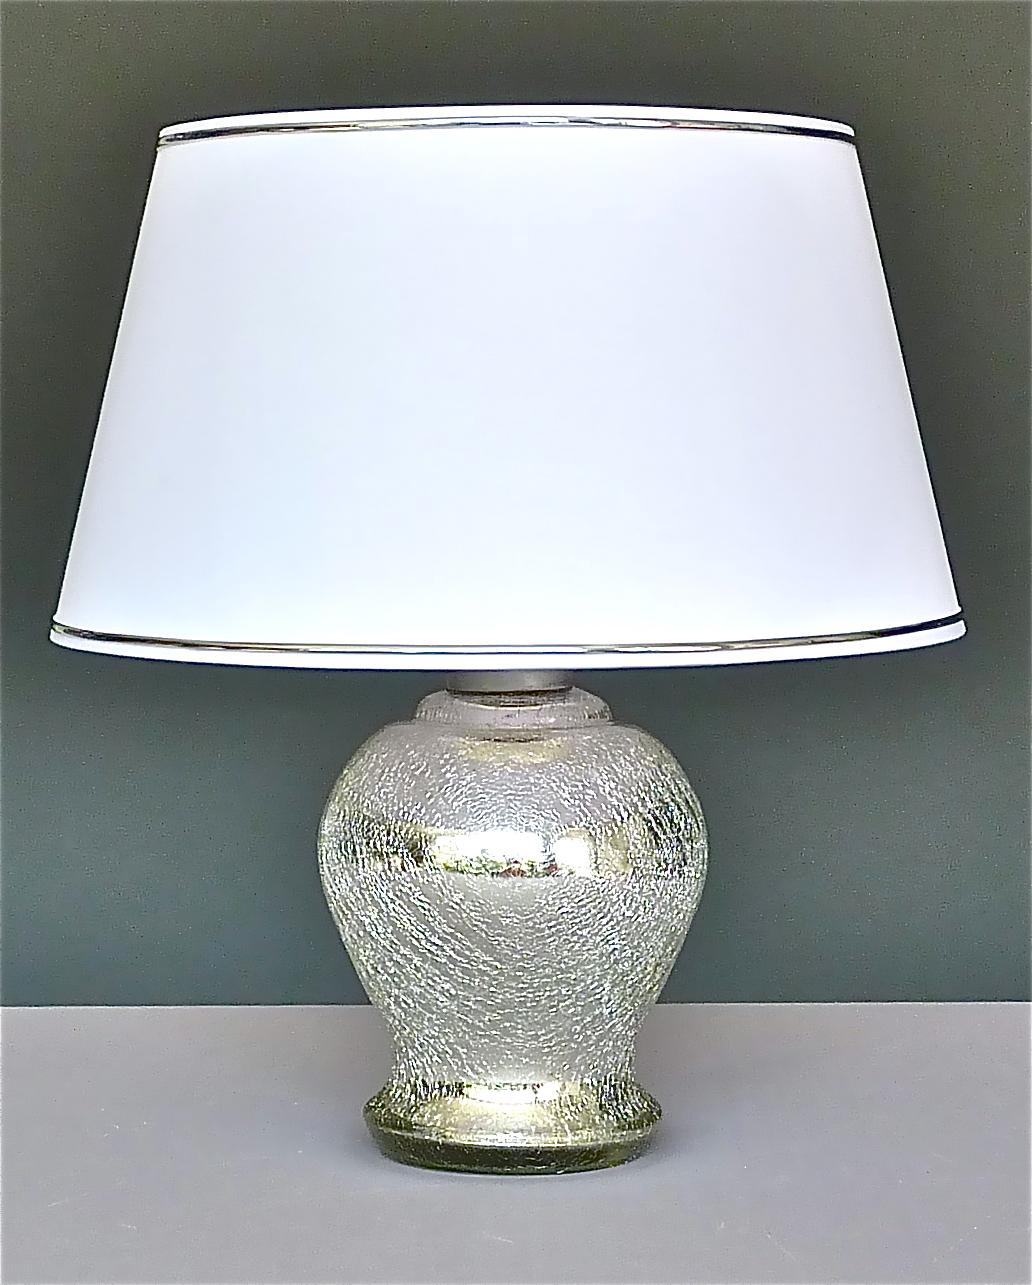 Rare Modernism Art Deco table lamp in thick silver mirrored glass with crackle effect finish which can be dated France, circa 1930s. It has a silver enameled metal fixture and a black plastic fitting for one E 27 screw bulb to illuminate. Wiring,